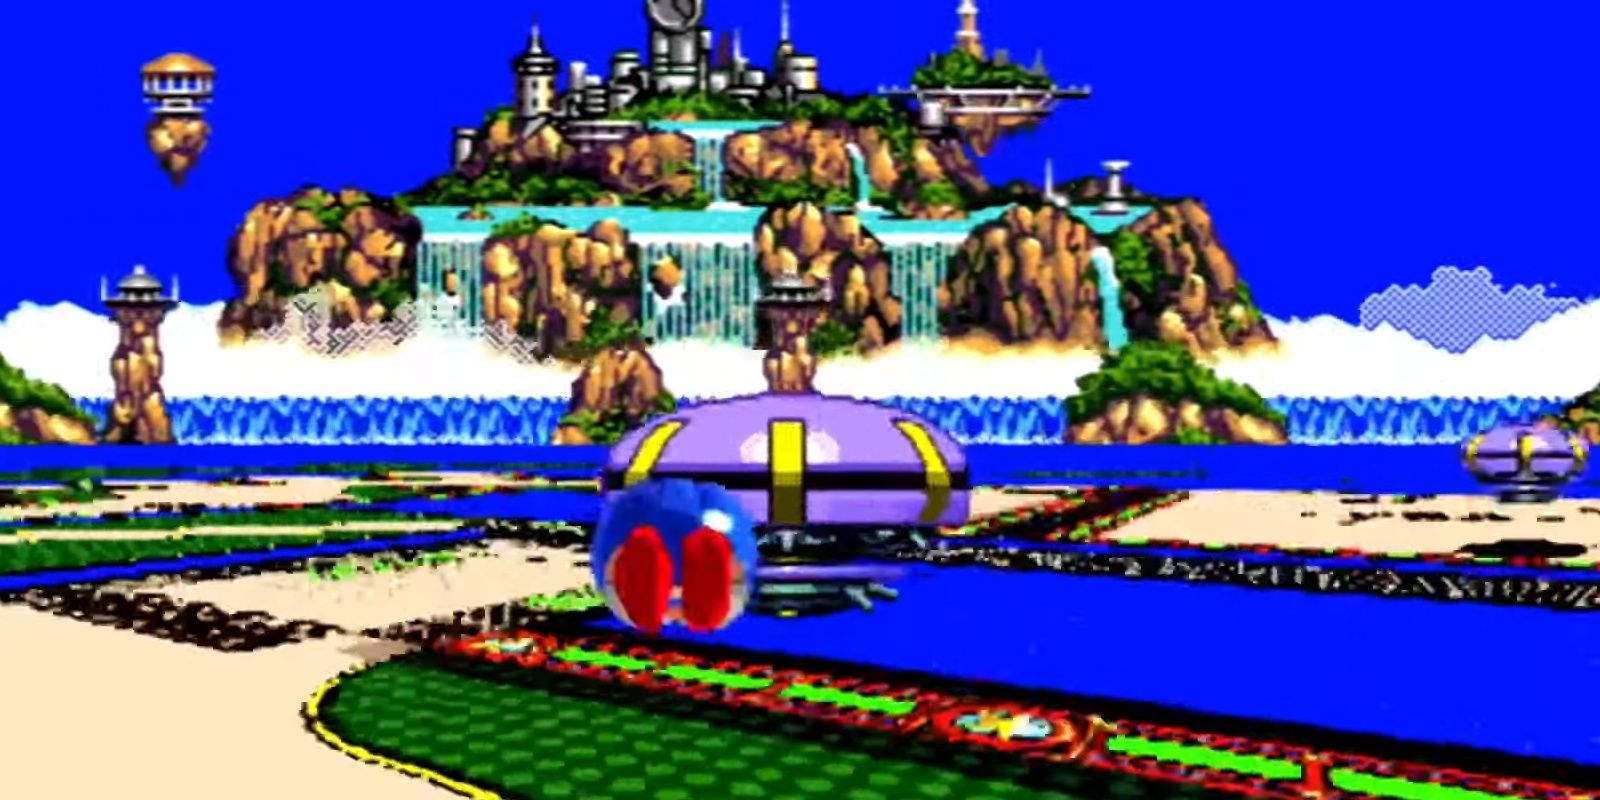 Sonic about to destroy a UFO in the special stage of Sonic CD.